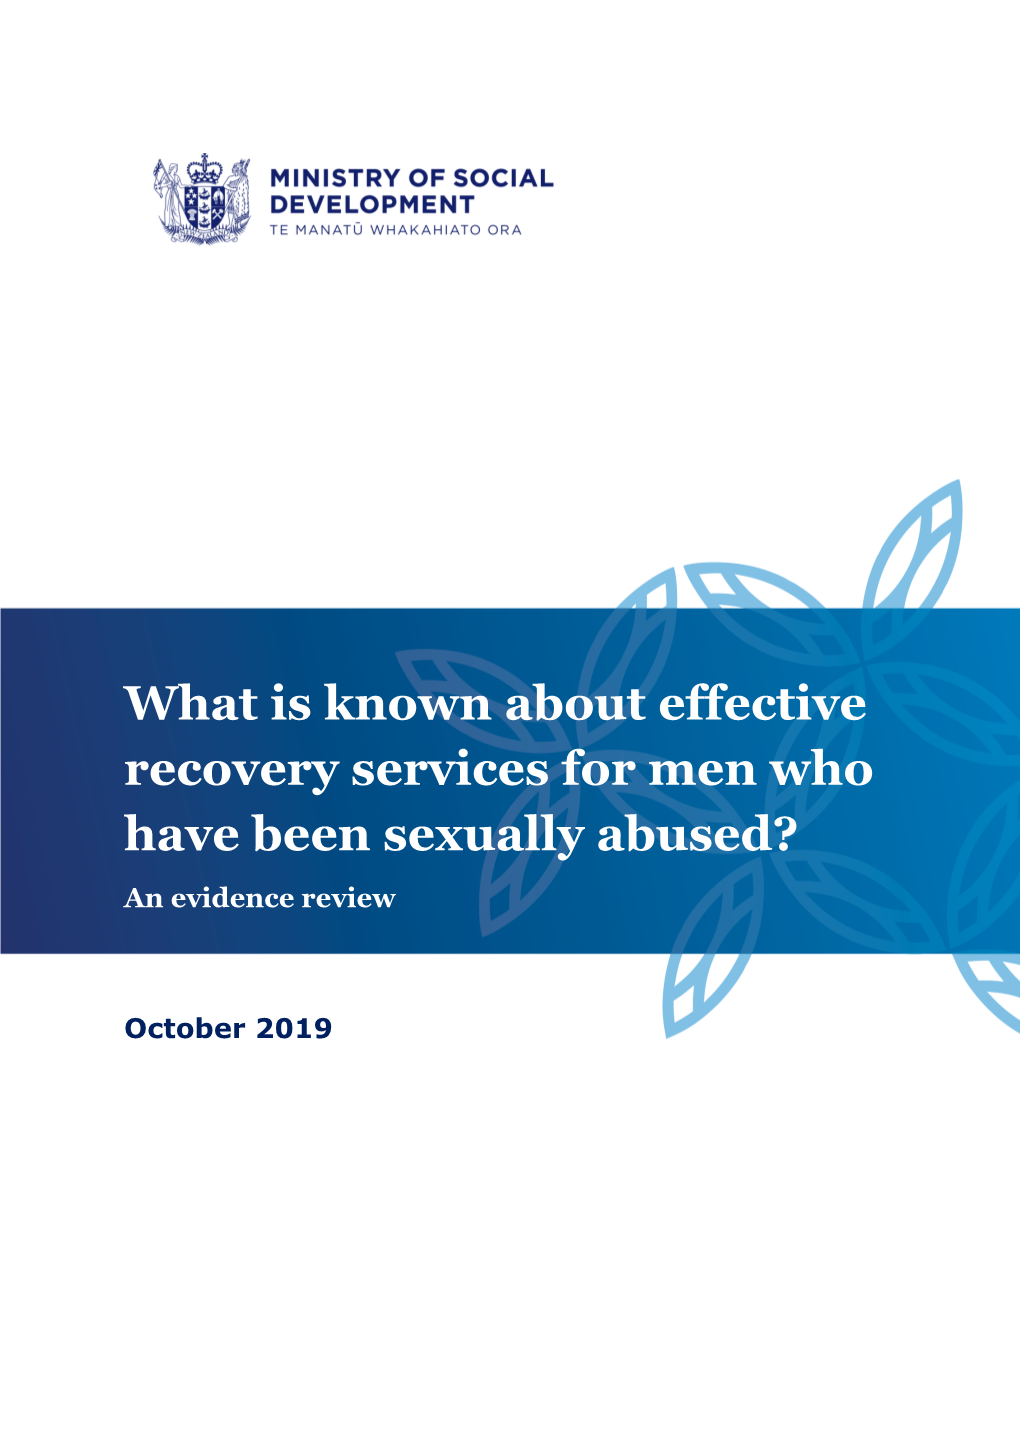 What Is Known About Effective Recovery Services for Men Who Have Been Sexually Abused? an Evidence Review